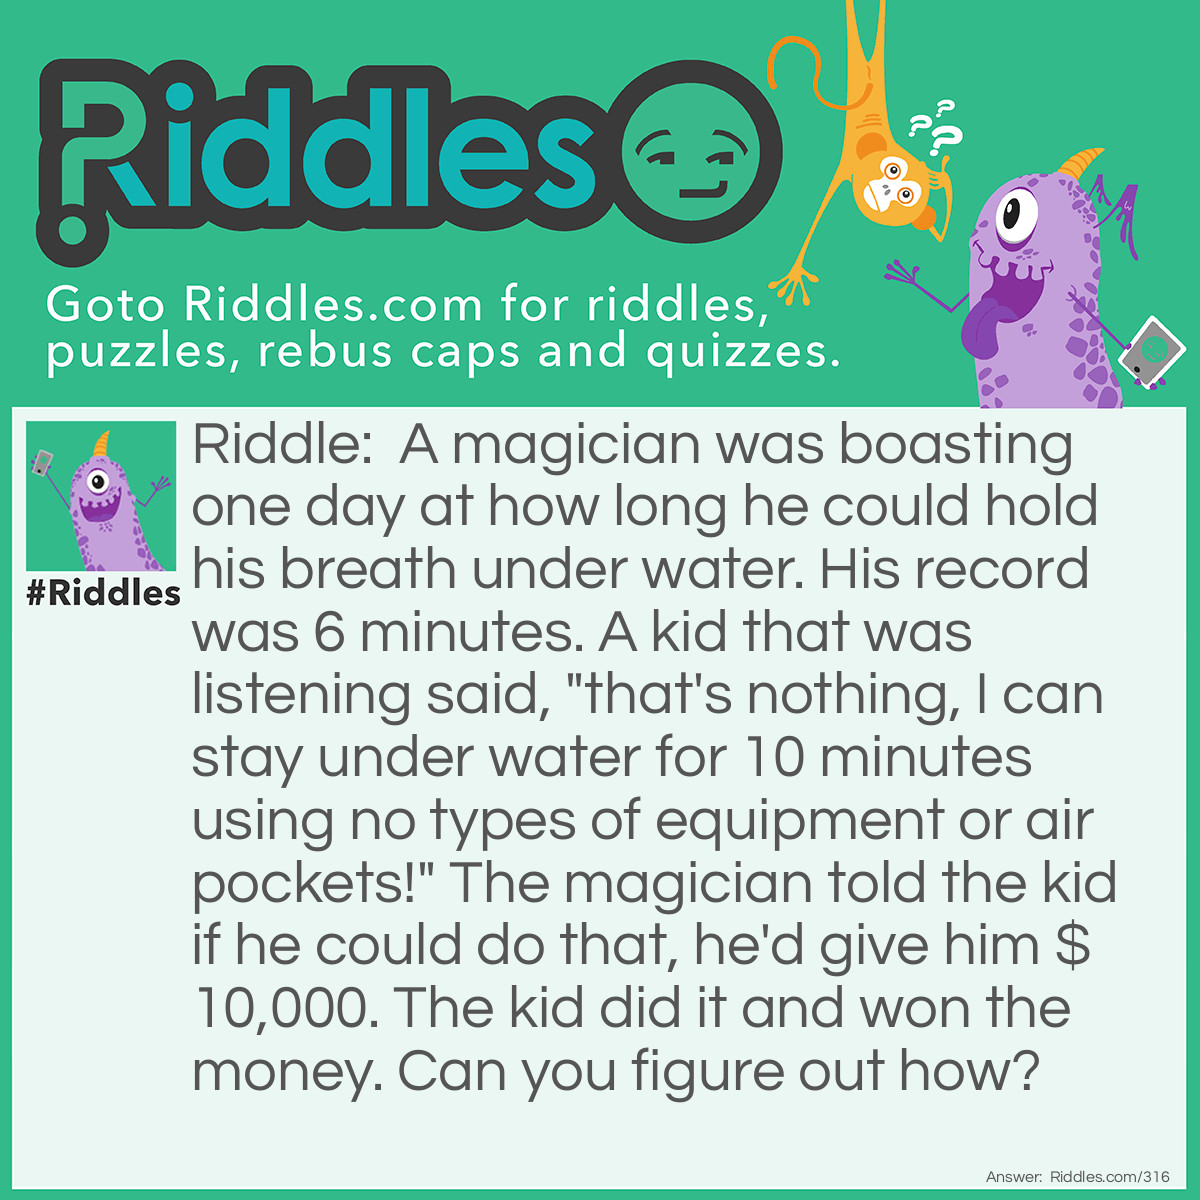 Riddle: A magician was boasting one day about how long he could hold his breath underwater. His record was 6 minutes. A kid that was listening said, "That's nothing, I can stay underwater for 10 minutes using no type of equipment or air pockets!" The magician told the kid if he could do that, he'd give him $10,000. The kid did it and won the money. Can you figure out how? Answer: The kid filled a glass of water and held it over his head for 10 minutes.